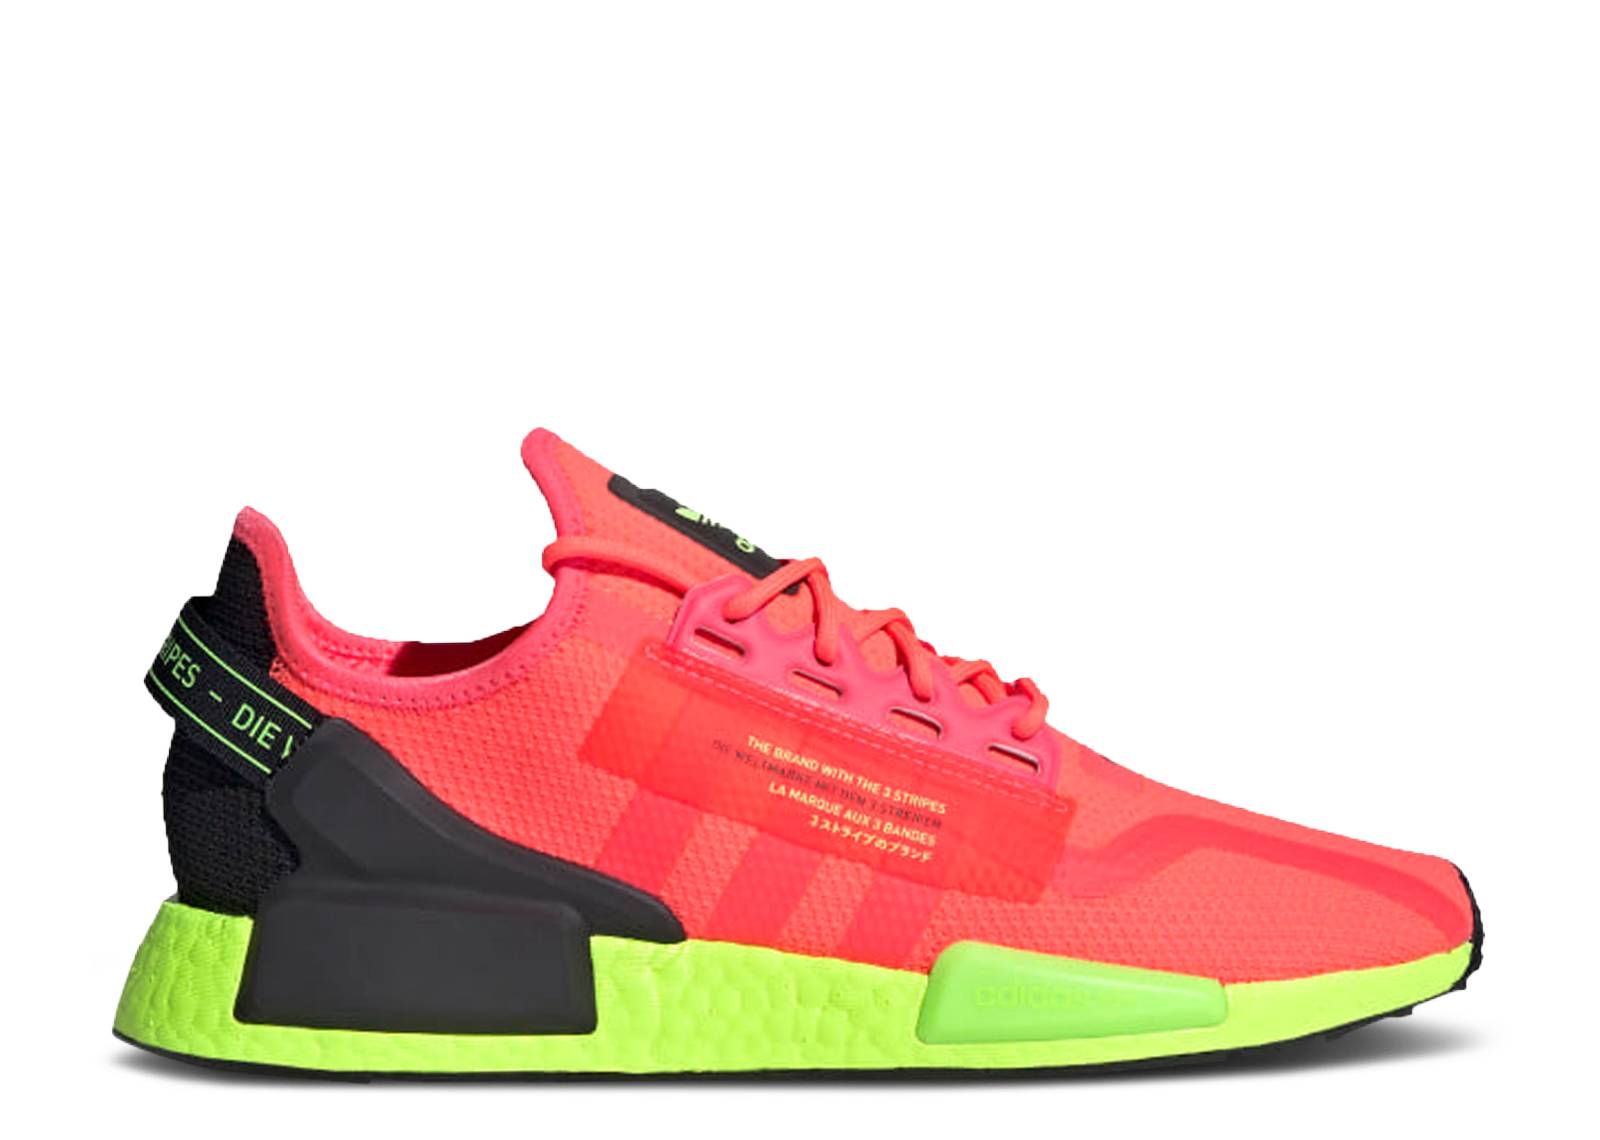 NMD_R1 V2 'Watermelon Pack - Signal Pink'